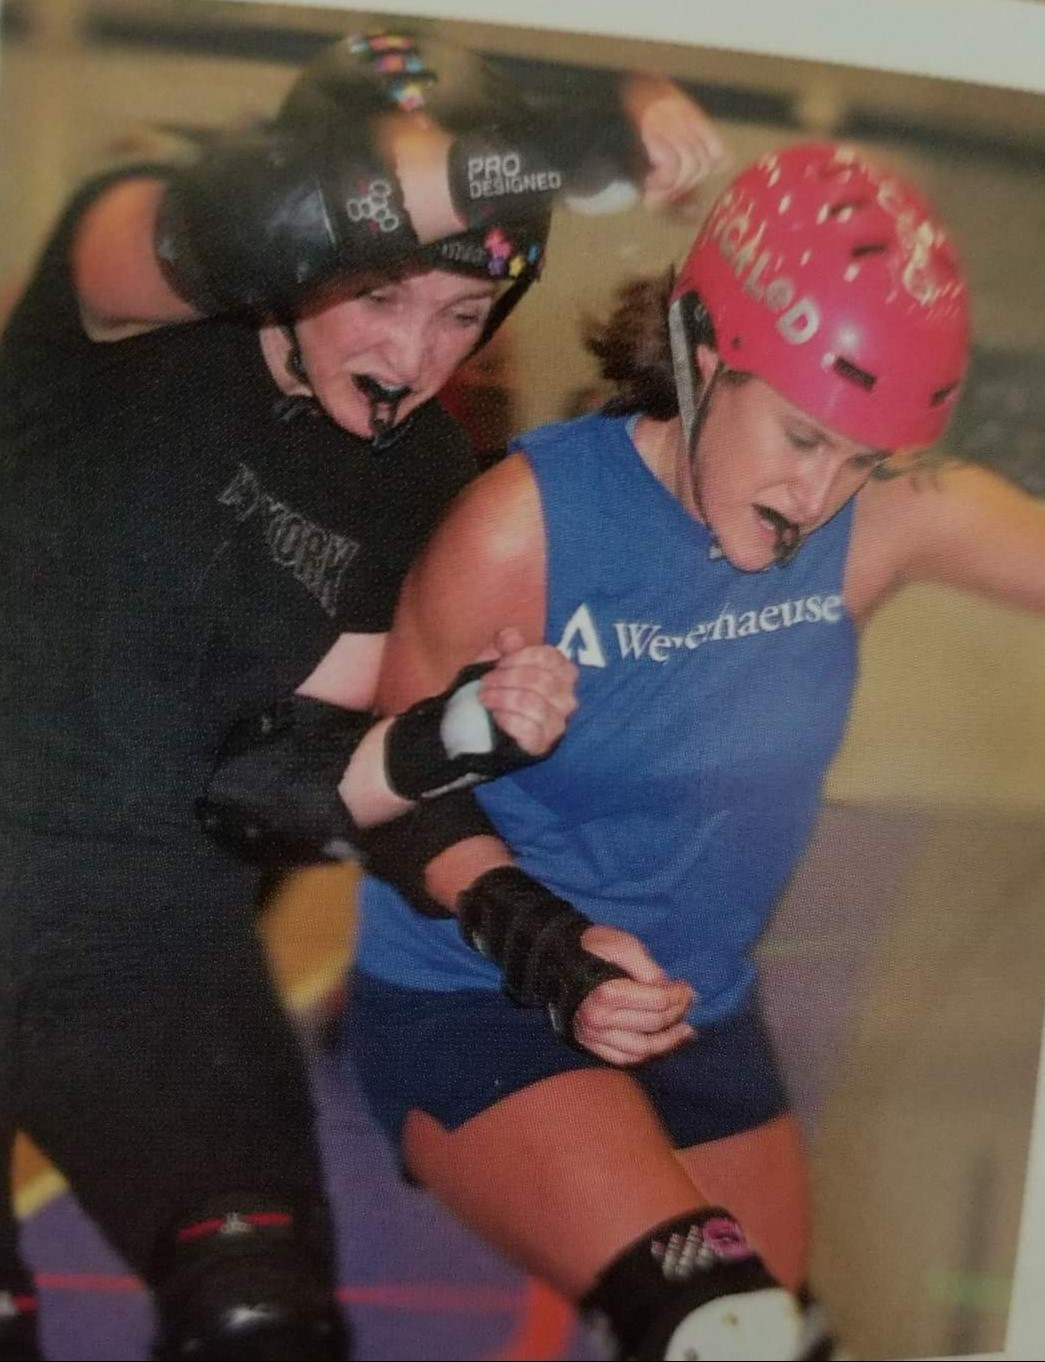 Image of Amber taking part in a roller derby game in 2009. Amber is clad in a red helmet and blue t-shirt with "Weyerhaesuer" on the front, and has an opponent trying to stop her progress.